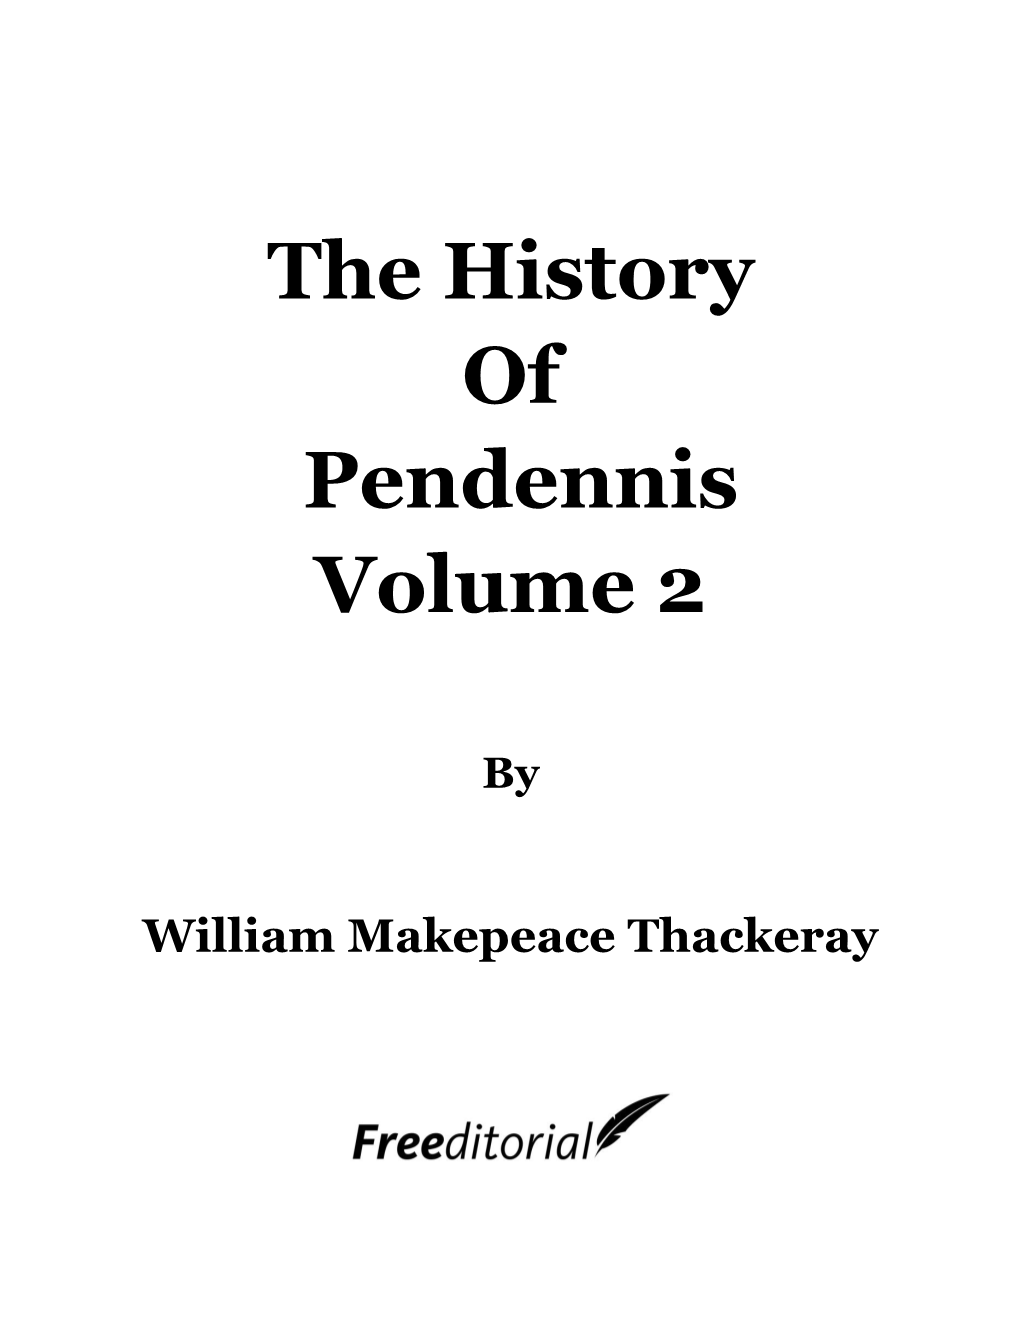 The History of Pendennis Volume 2